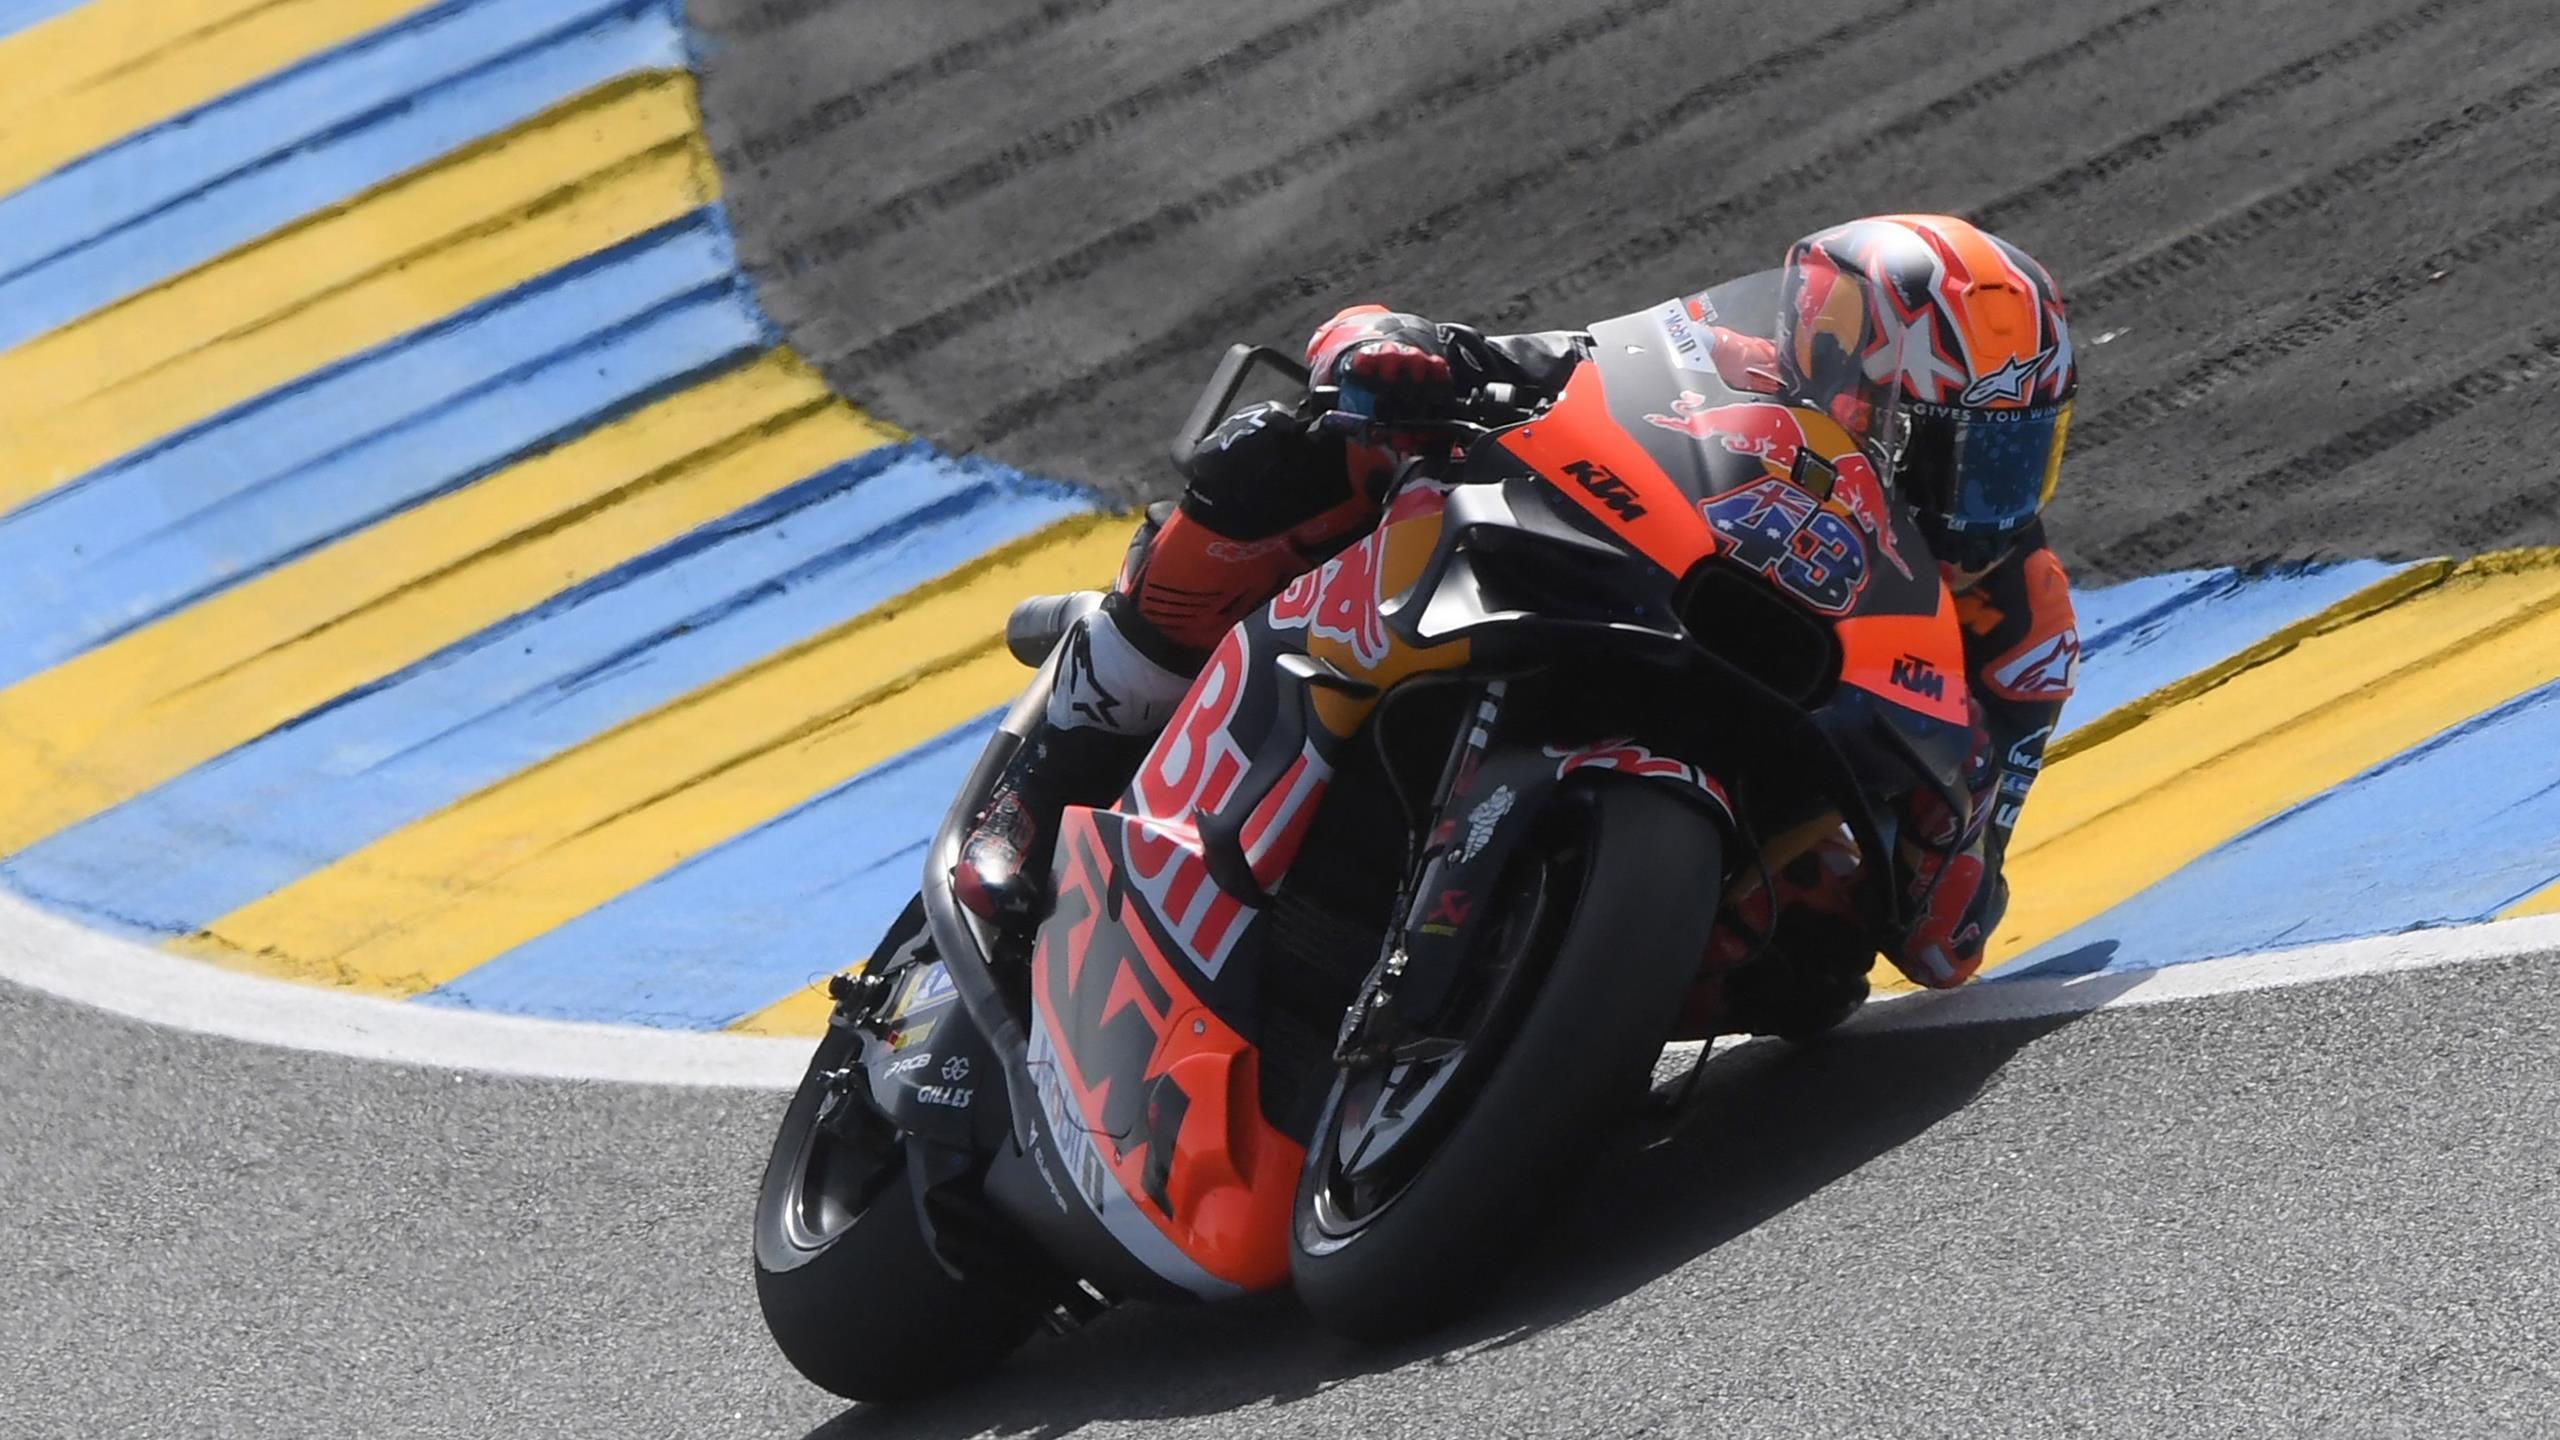 Marc Marquez's test time today a secret as he shares track with